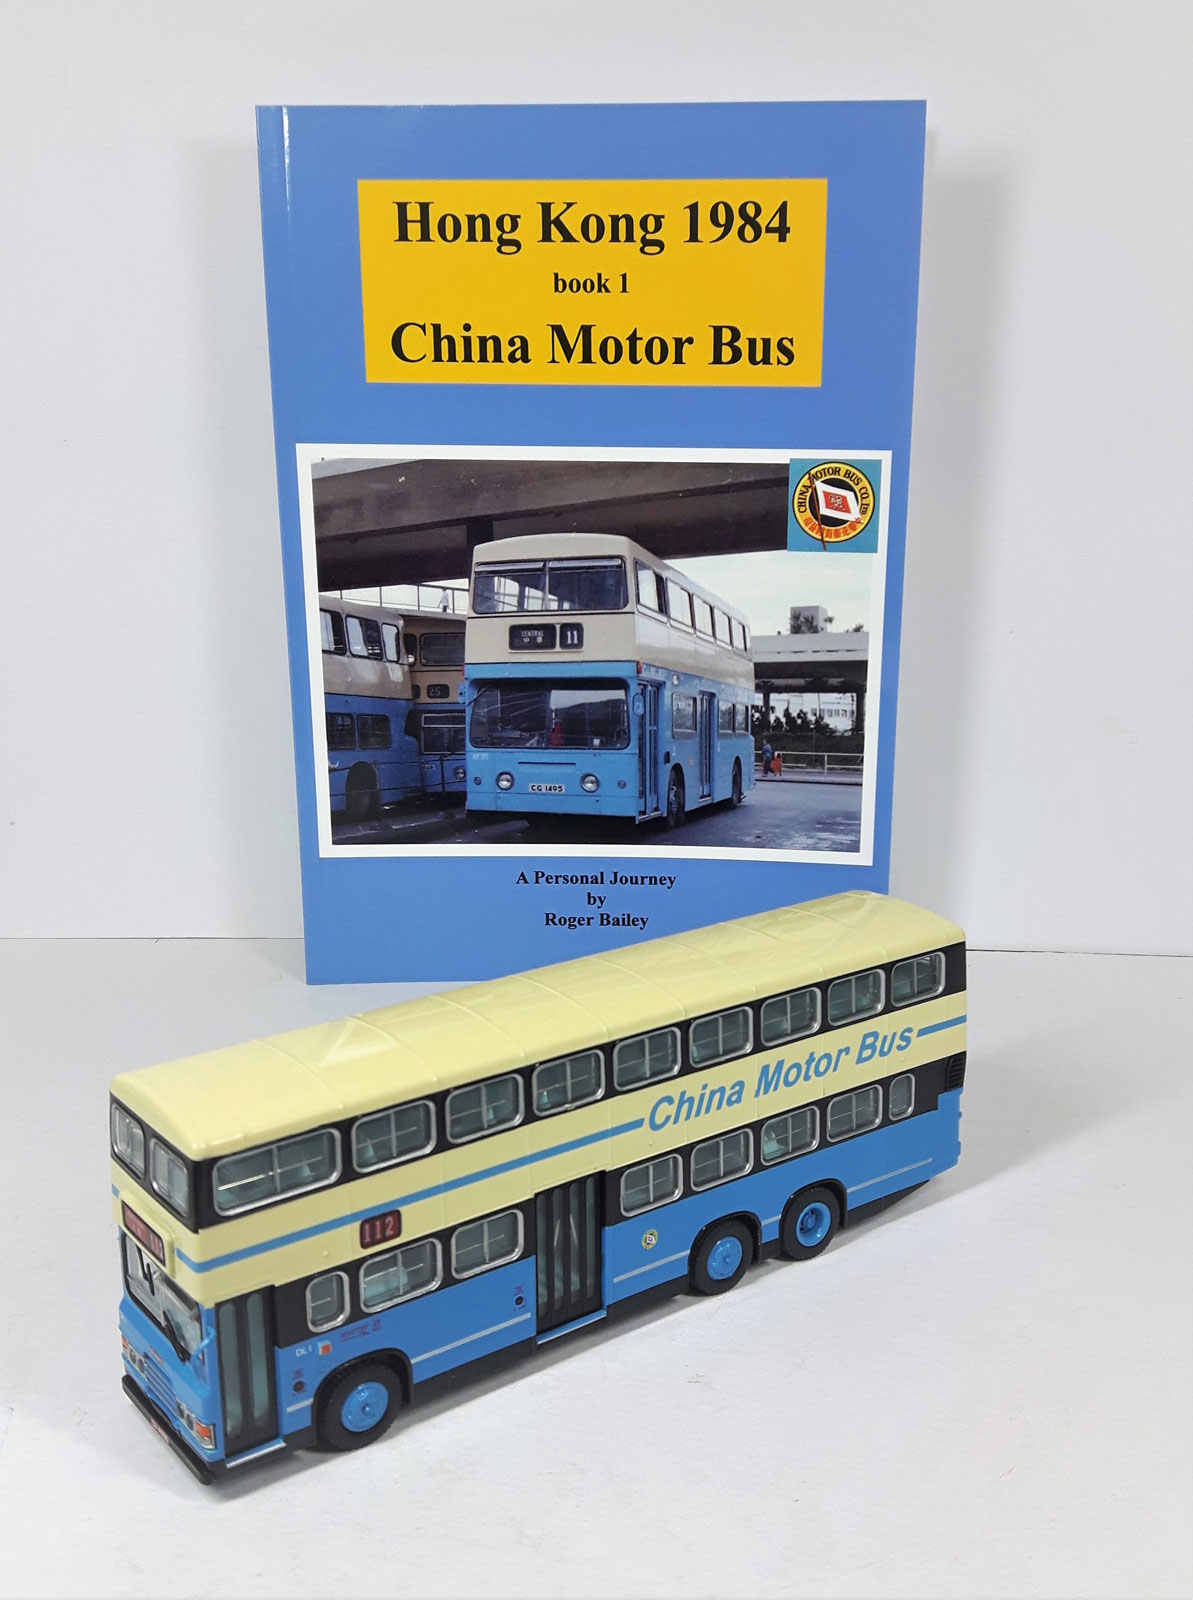 Tiny City Hong Kong Tram Sanrio Characters Livery Diecast Model 168 